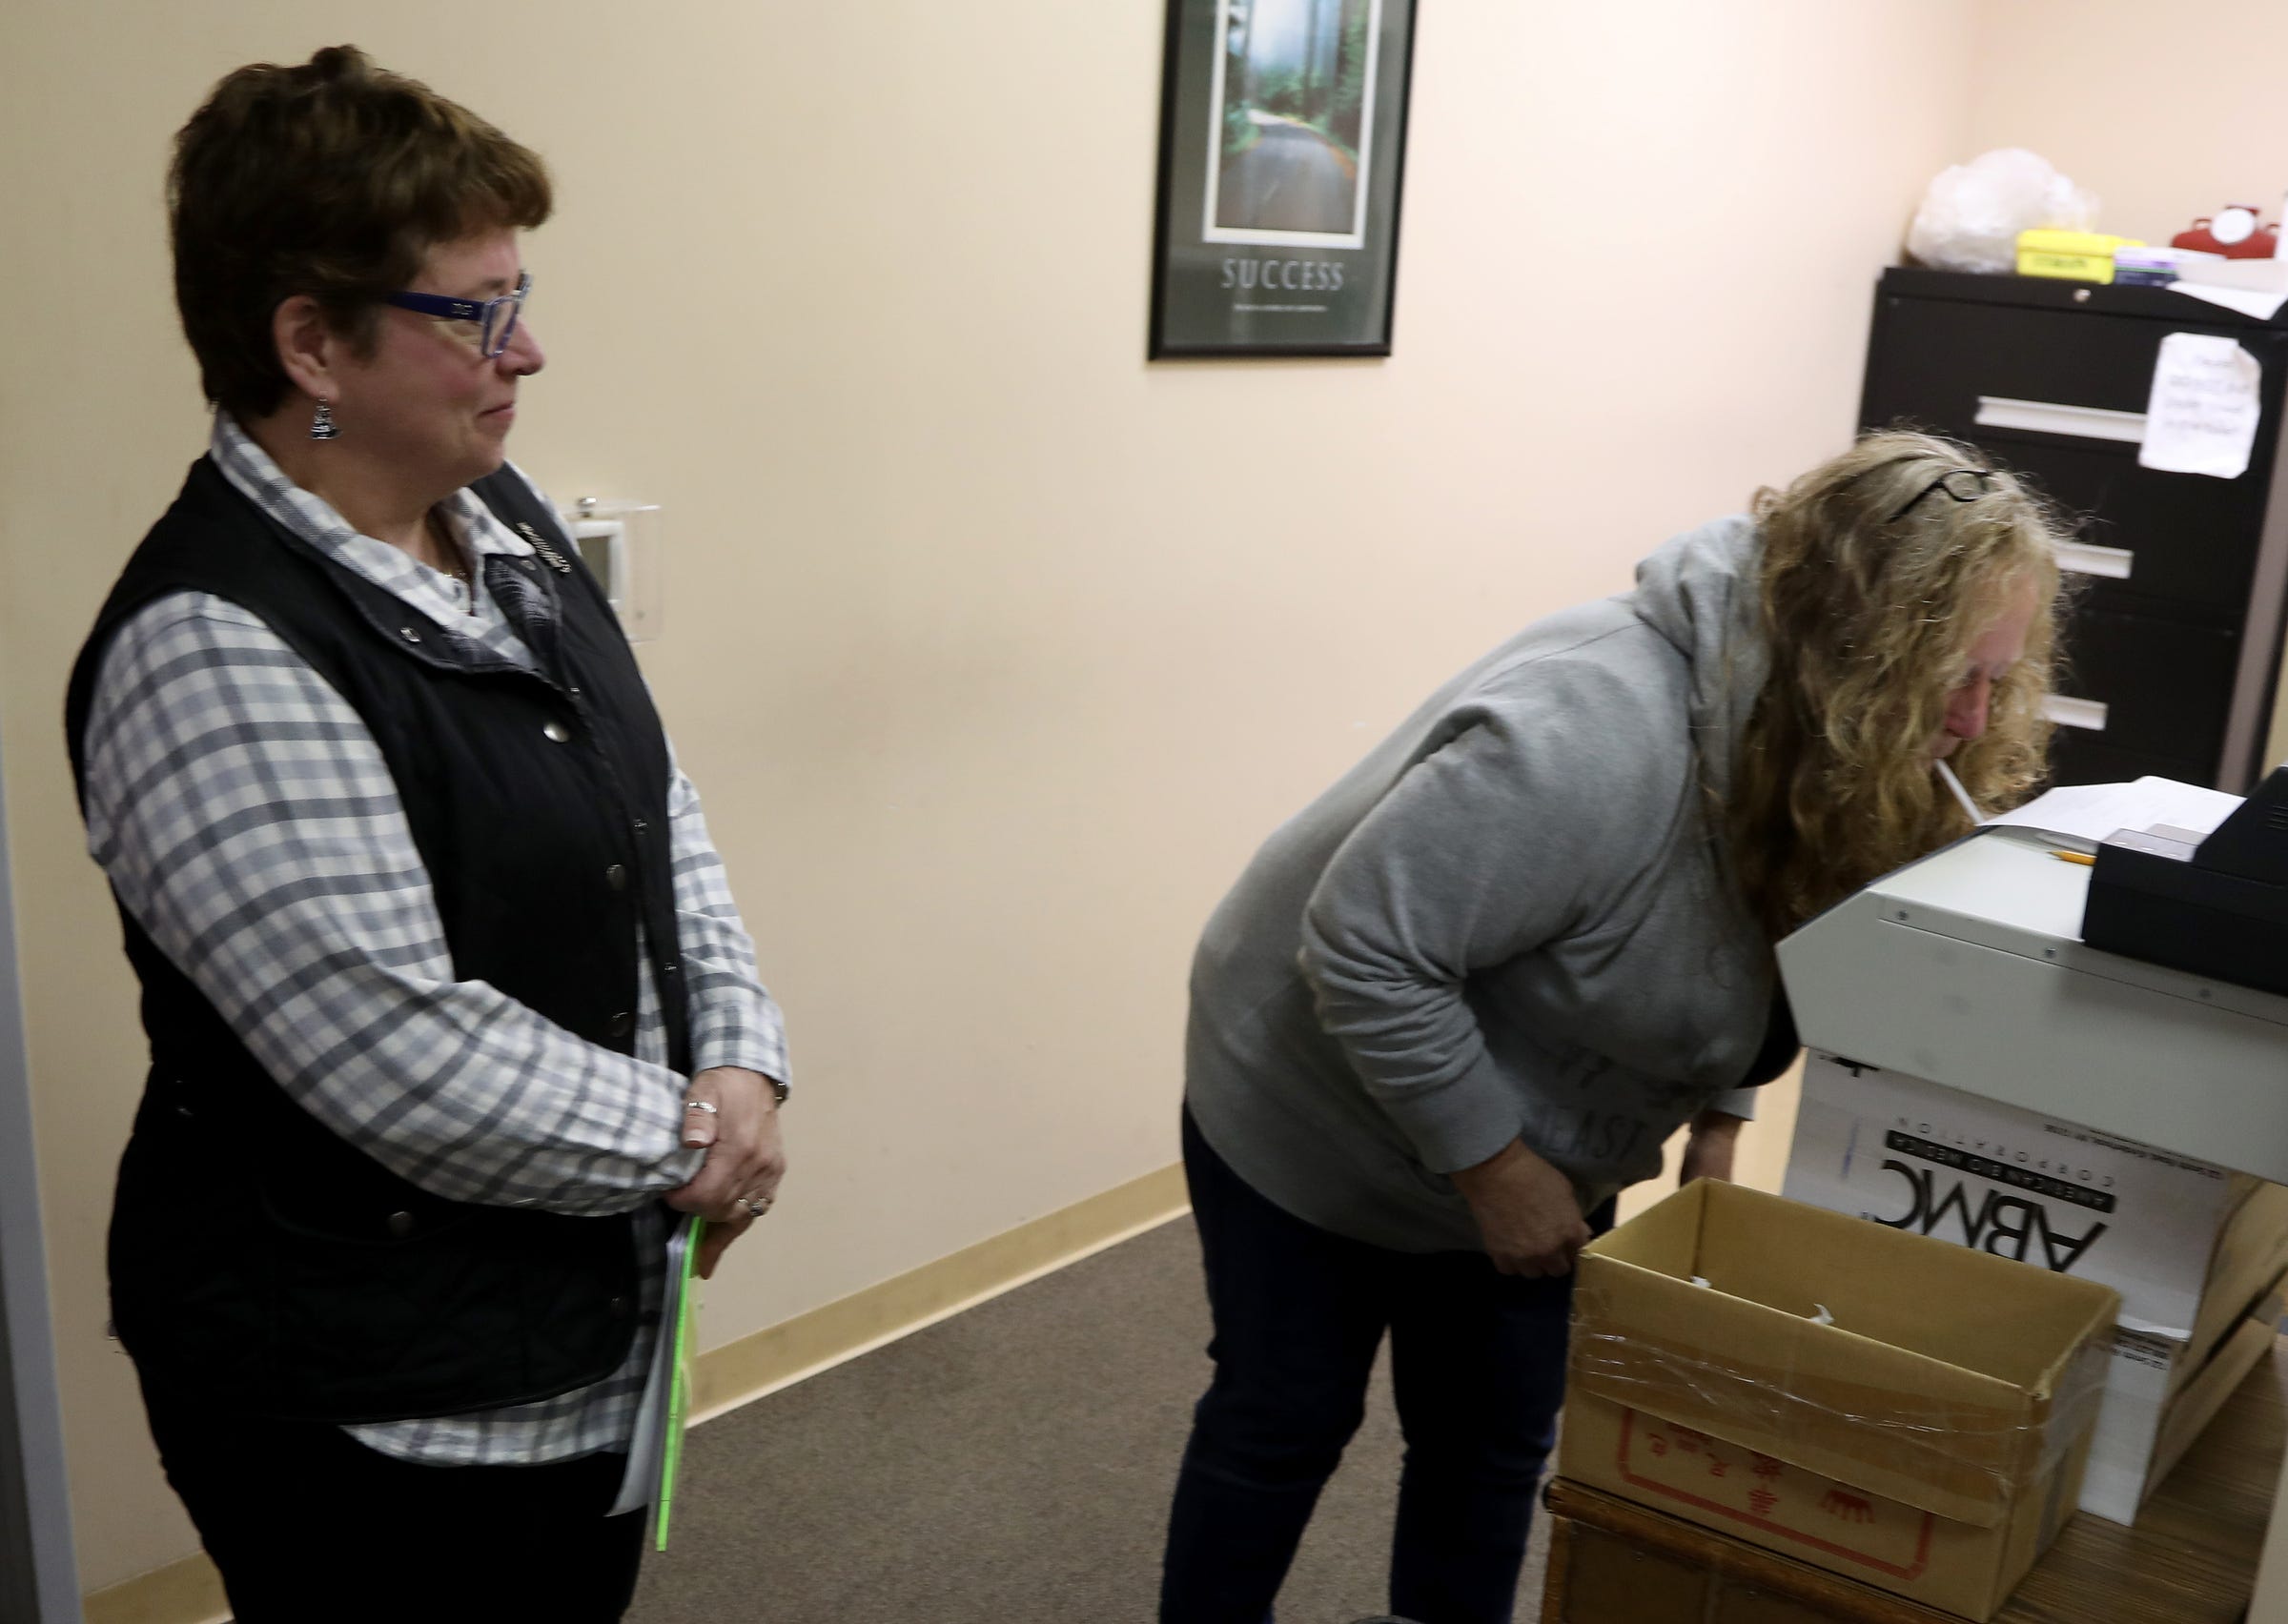 Parole officer Amy Lumley monitors as Edith Turner takes a breathalyzer test during a check-in at the parole office in Pontiac on Wednesday, October 16, 2019.